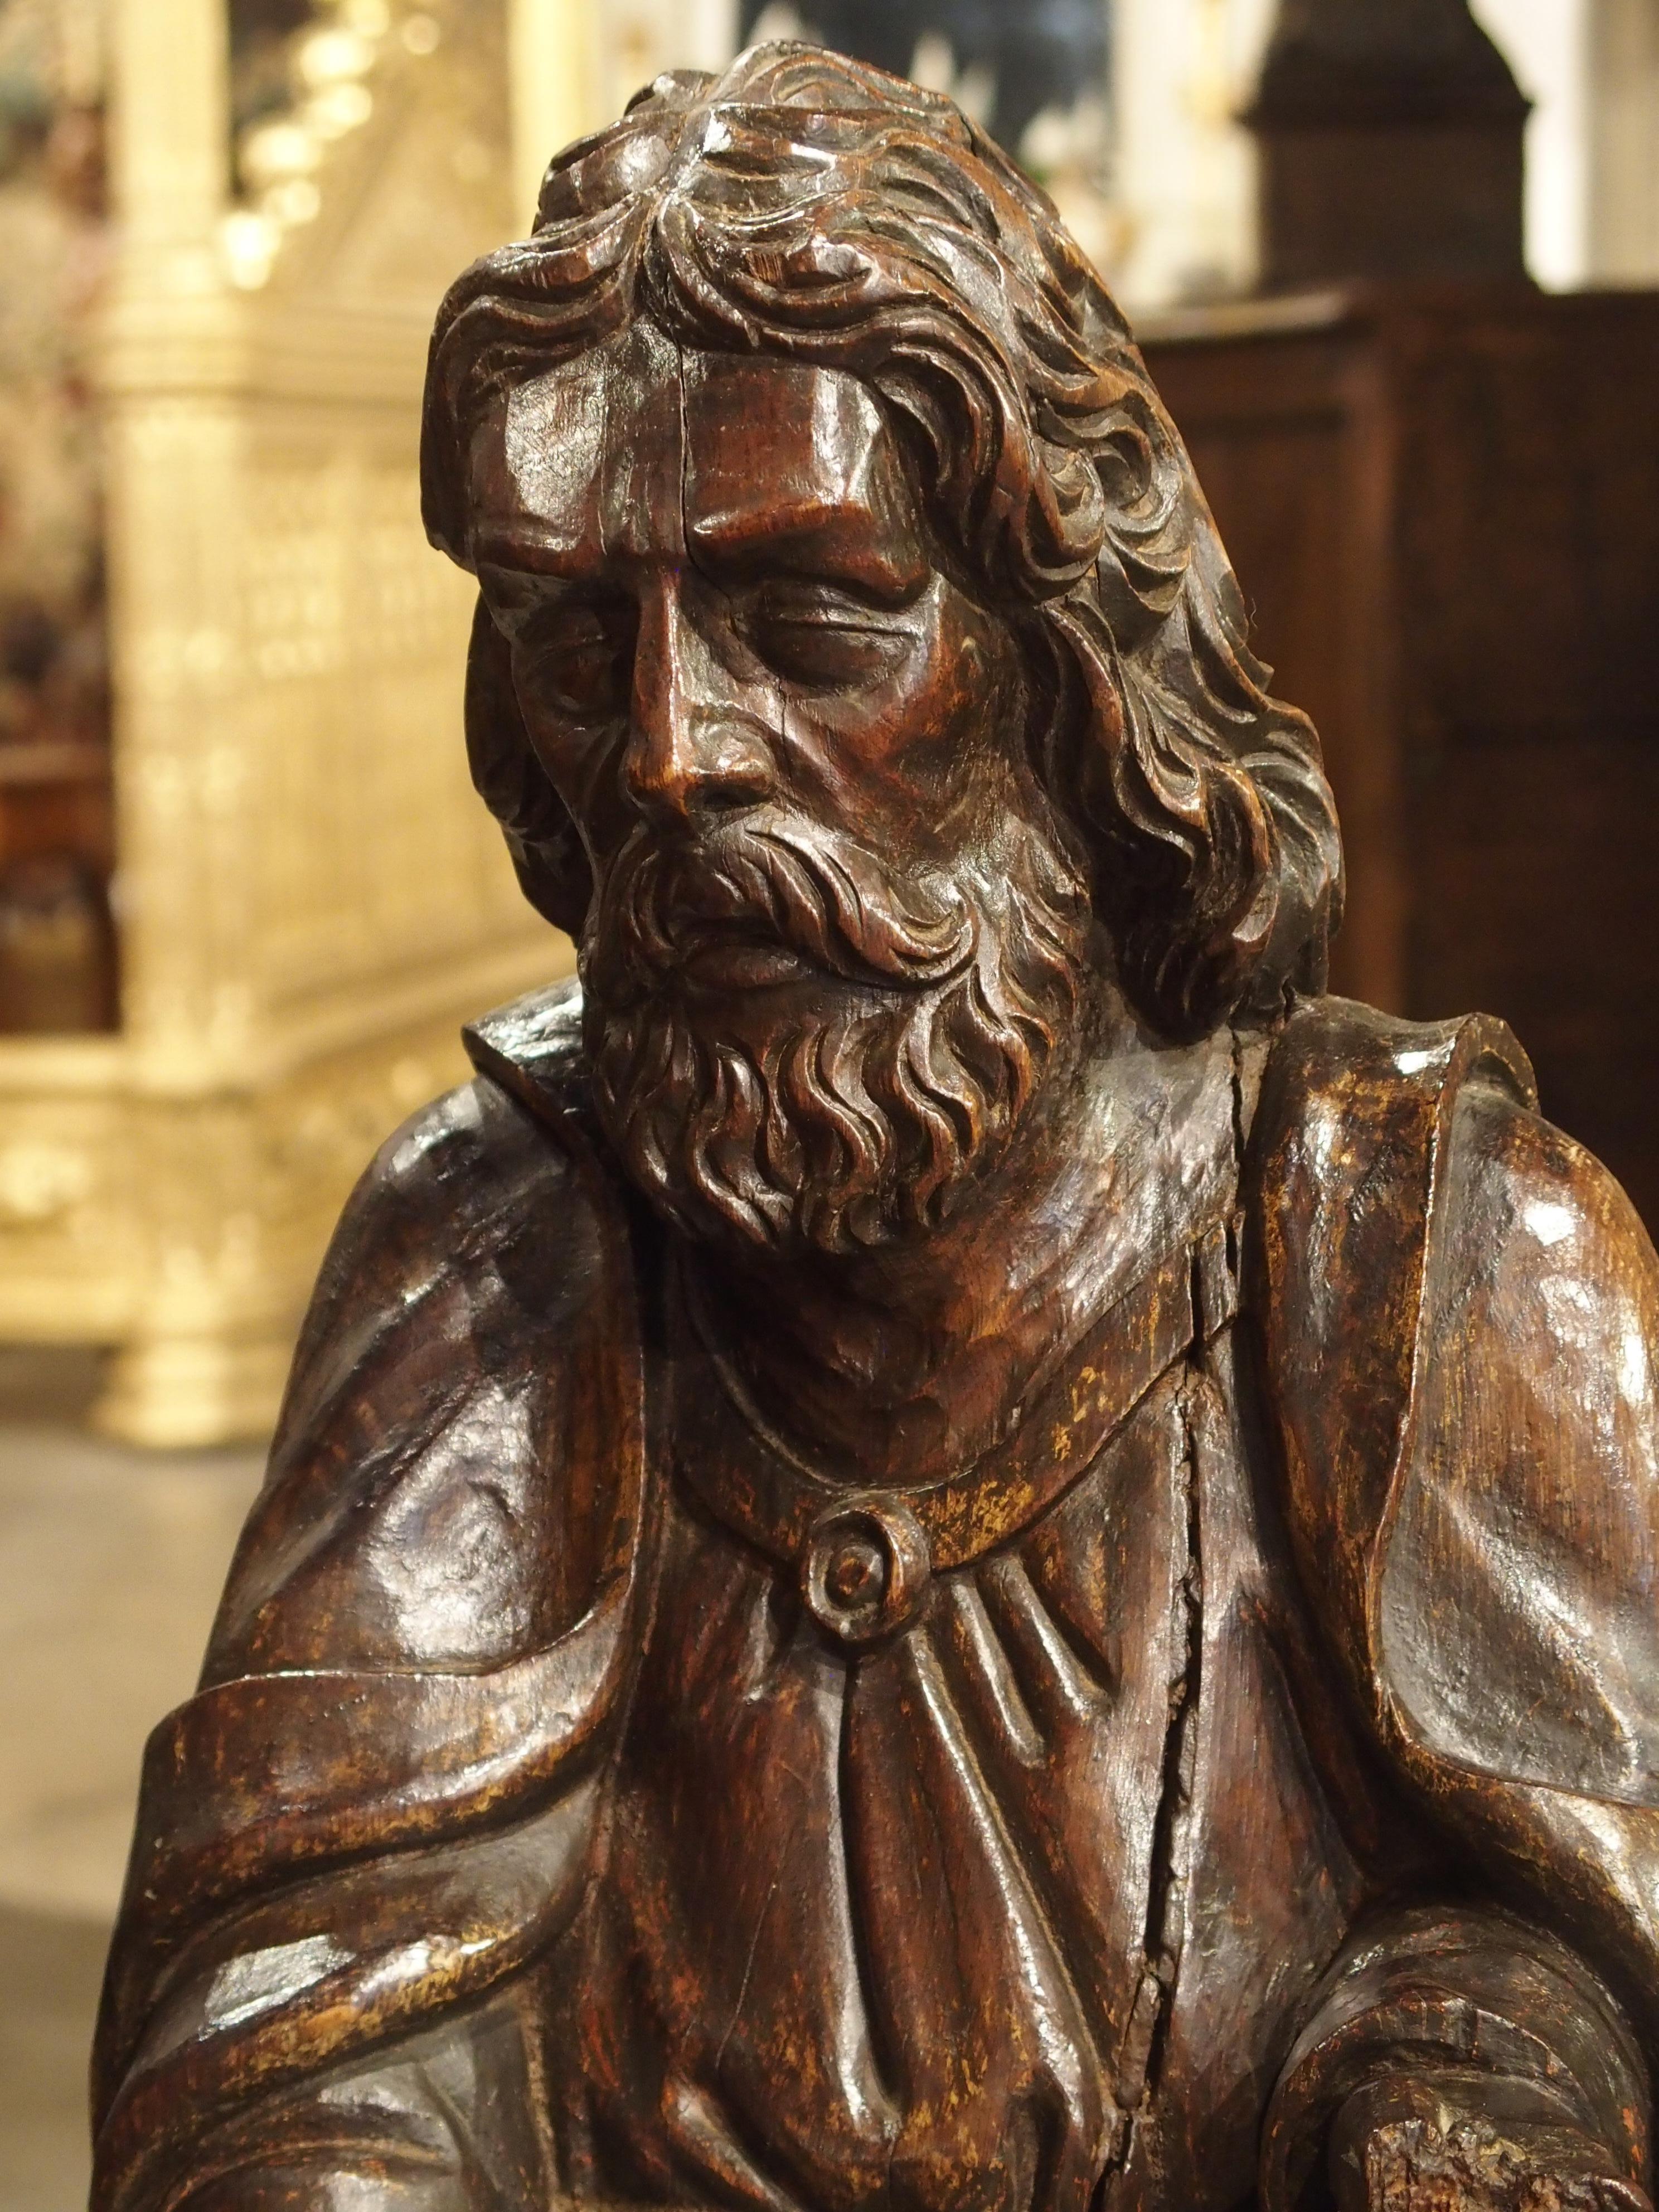 This tall French statue of St. Bartholomew was hand-carved from oak in the 1700’s. This depiction of St. Bartholomew is not often seen in art, except for one of the most well known renditions, which is in the Last Judgement by Michelangelo. This